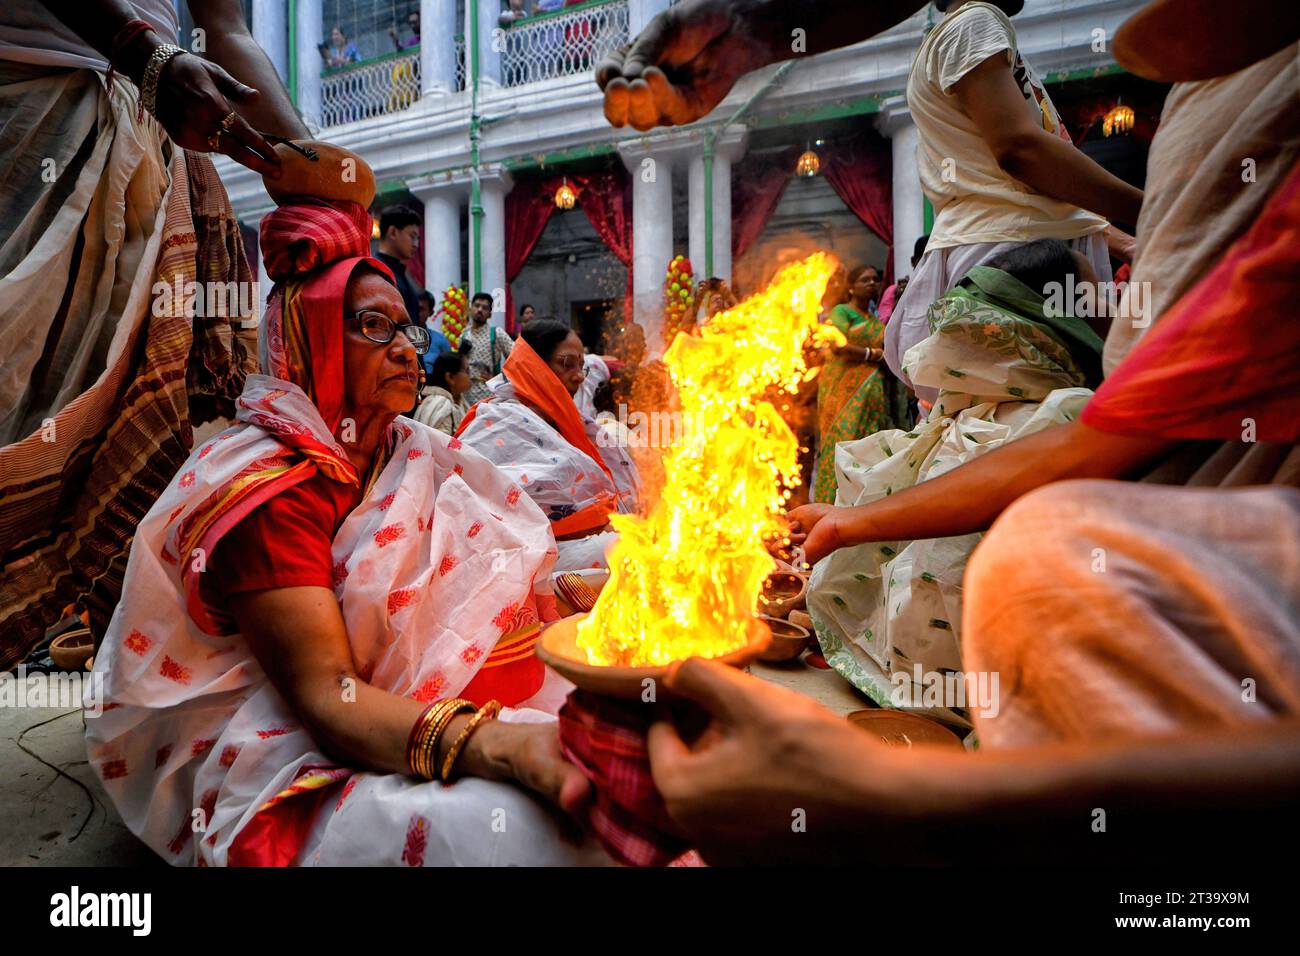 Kolkata, India. 22nd Oct, 2023. An Indian Hindu woman sits with burning fire pots on her hands and head as part of their ritual practice which includes blind faith and superstition to overcome every difficulties in coming future during the Maha ashtami celebration on the 8th day of Durga puja. Durga puja is the biggest Hindu festival running for 9 days all over India. Credit: SOPA Images Limited/Alamy Live News Stock Photo